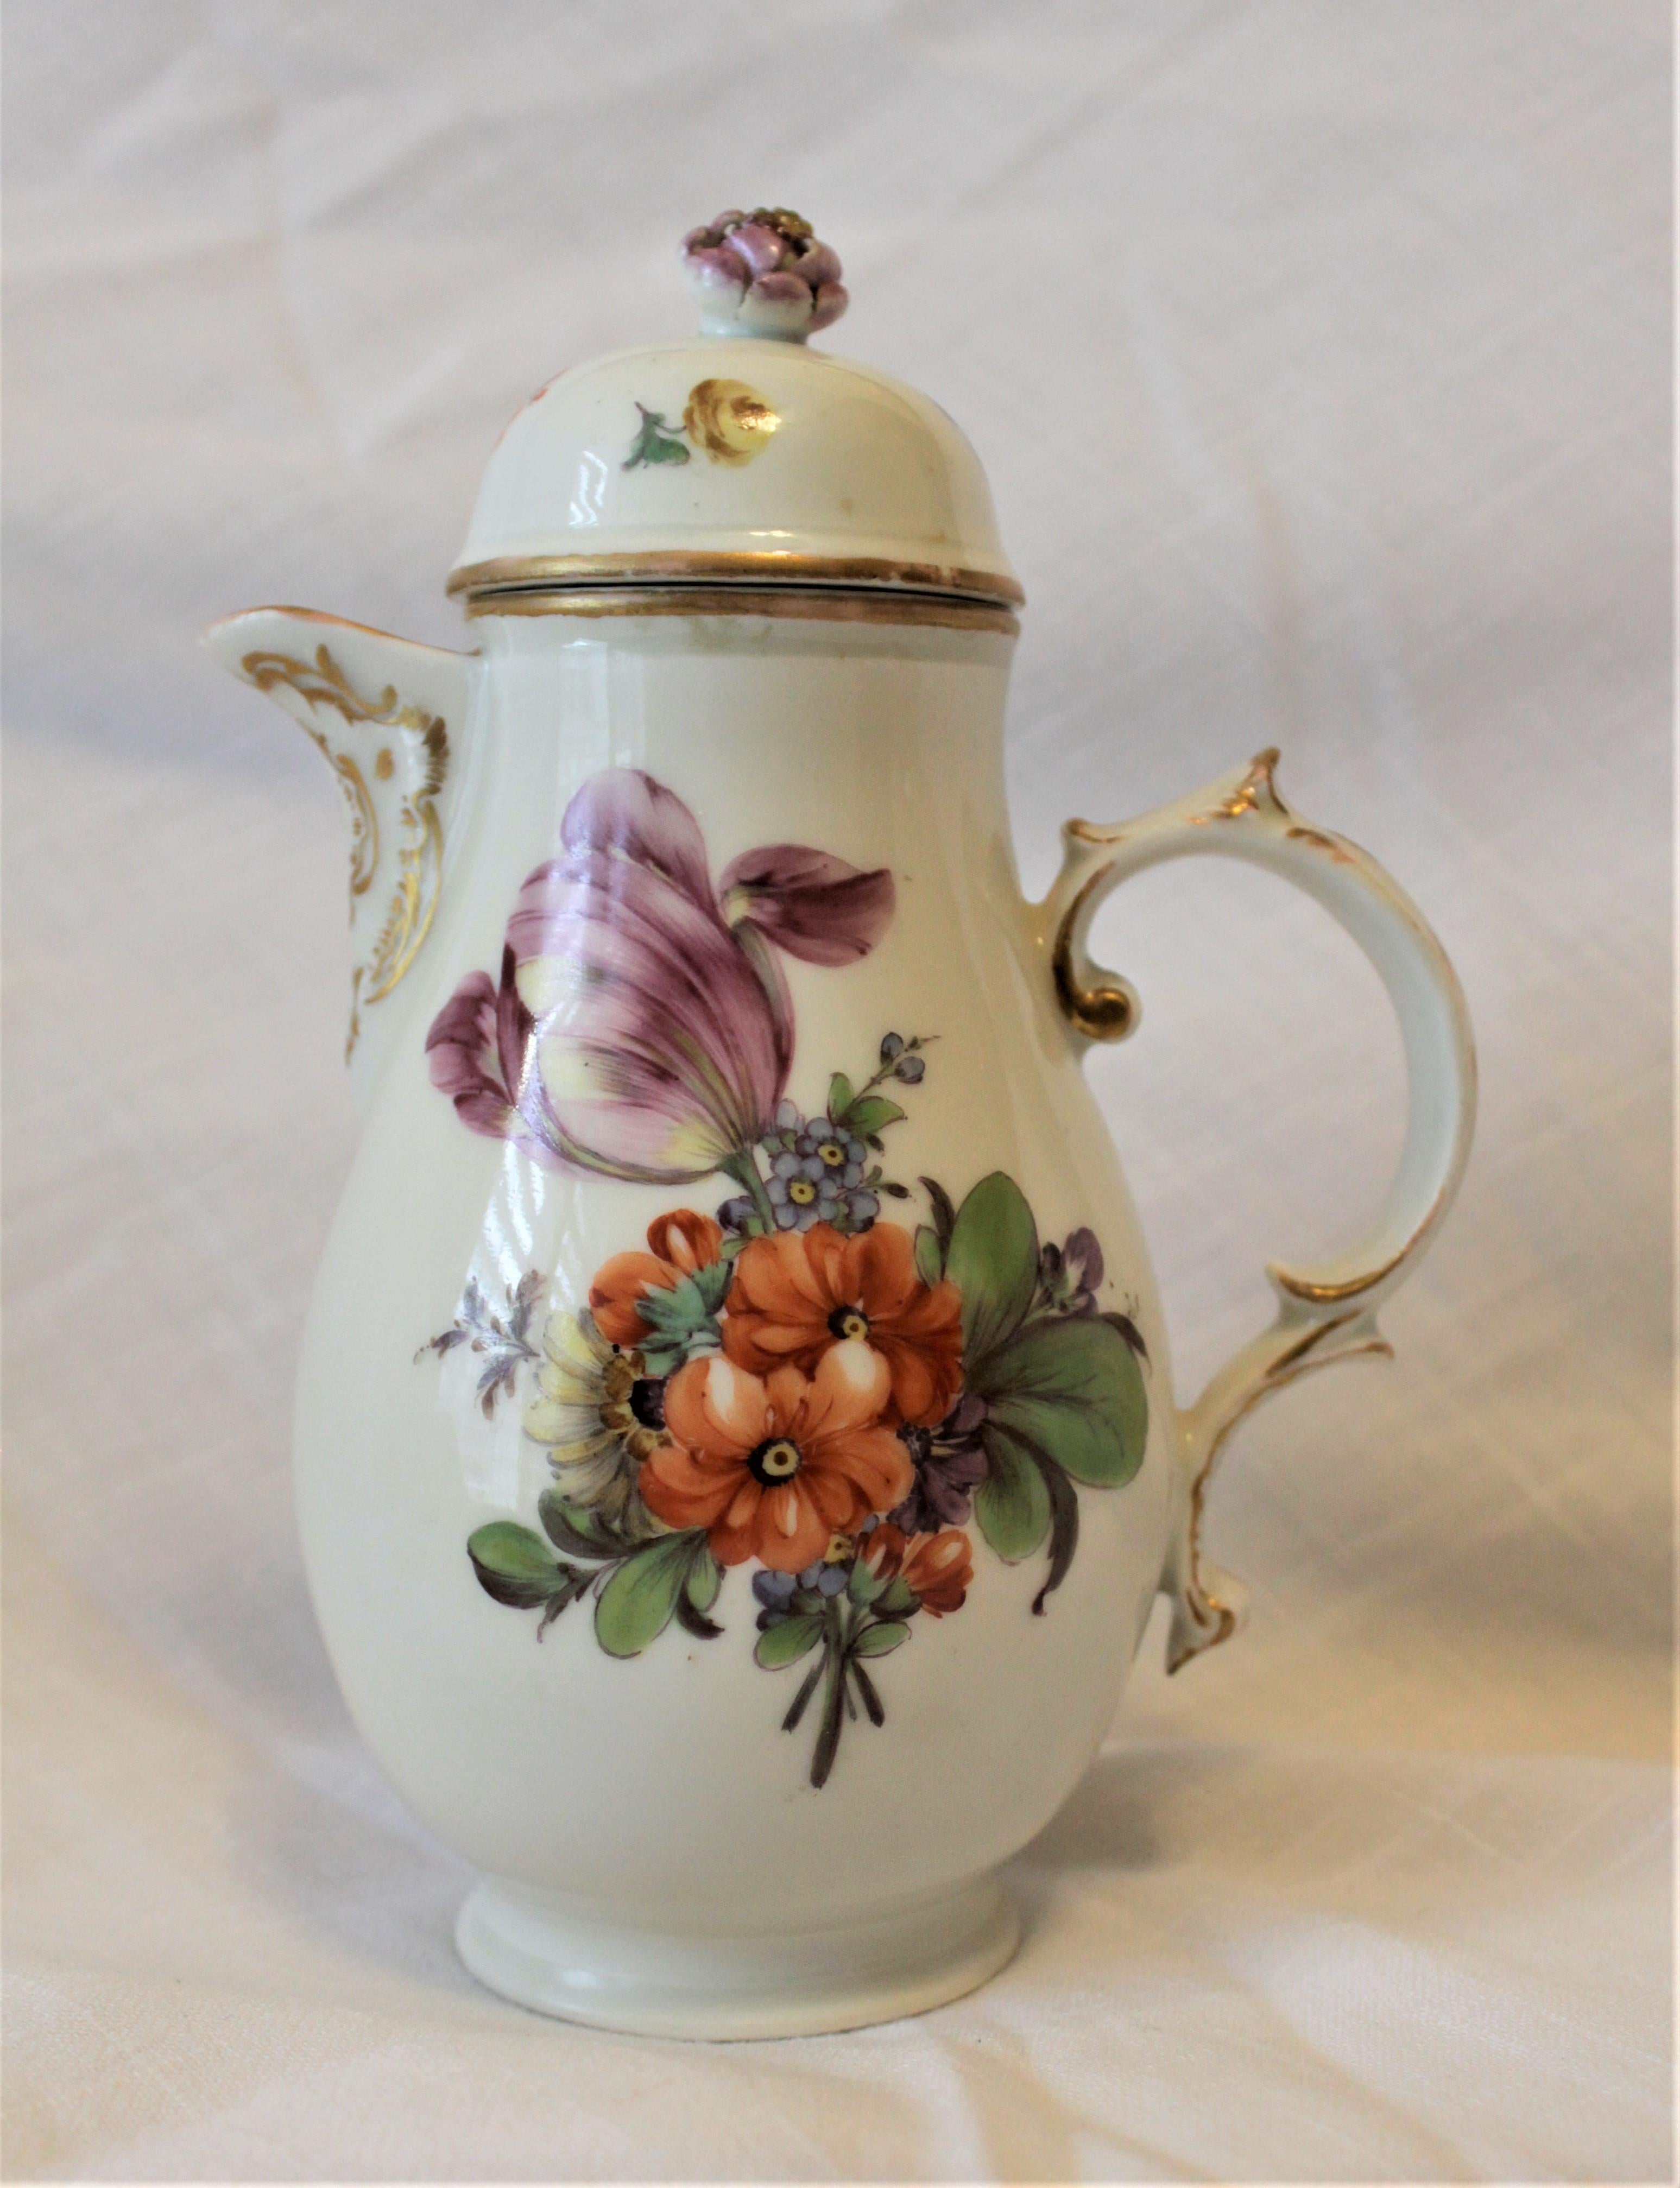 This antique German porcelain coffee pot was made by the Furstenberg Works factory in circa 1760 in the period Rococo style. This coffee pot is decorated with hand painted flowers in vibrant colors on the sides which is accented with fire gilt